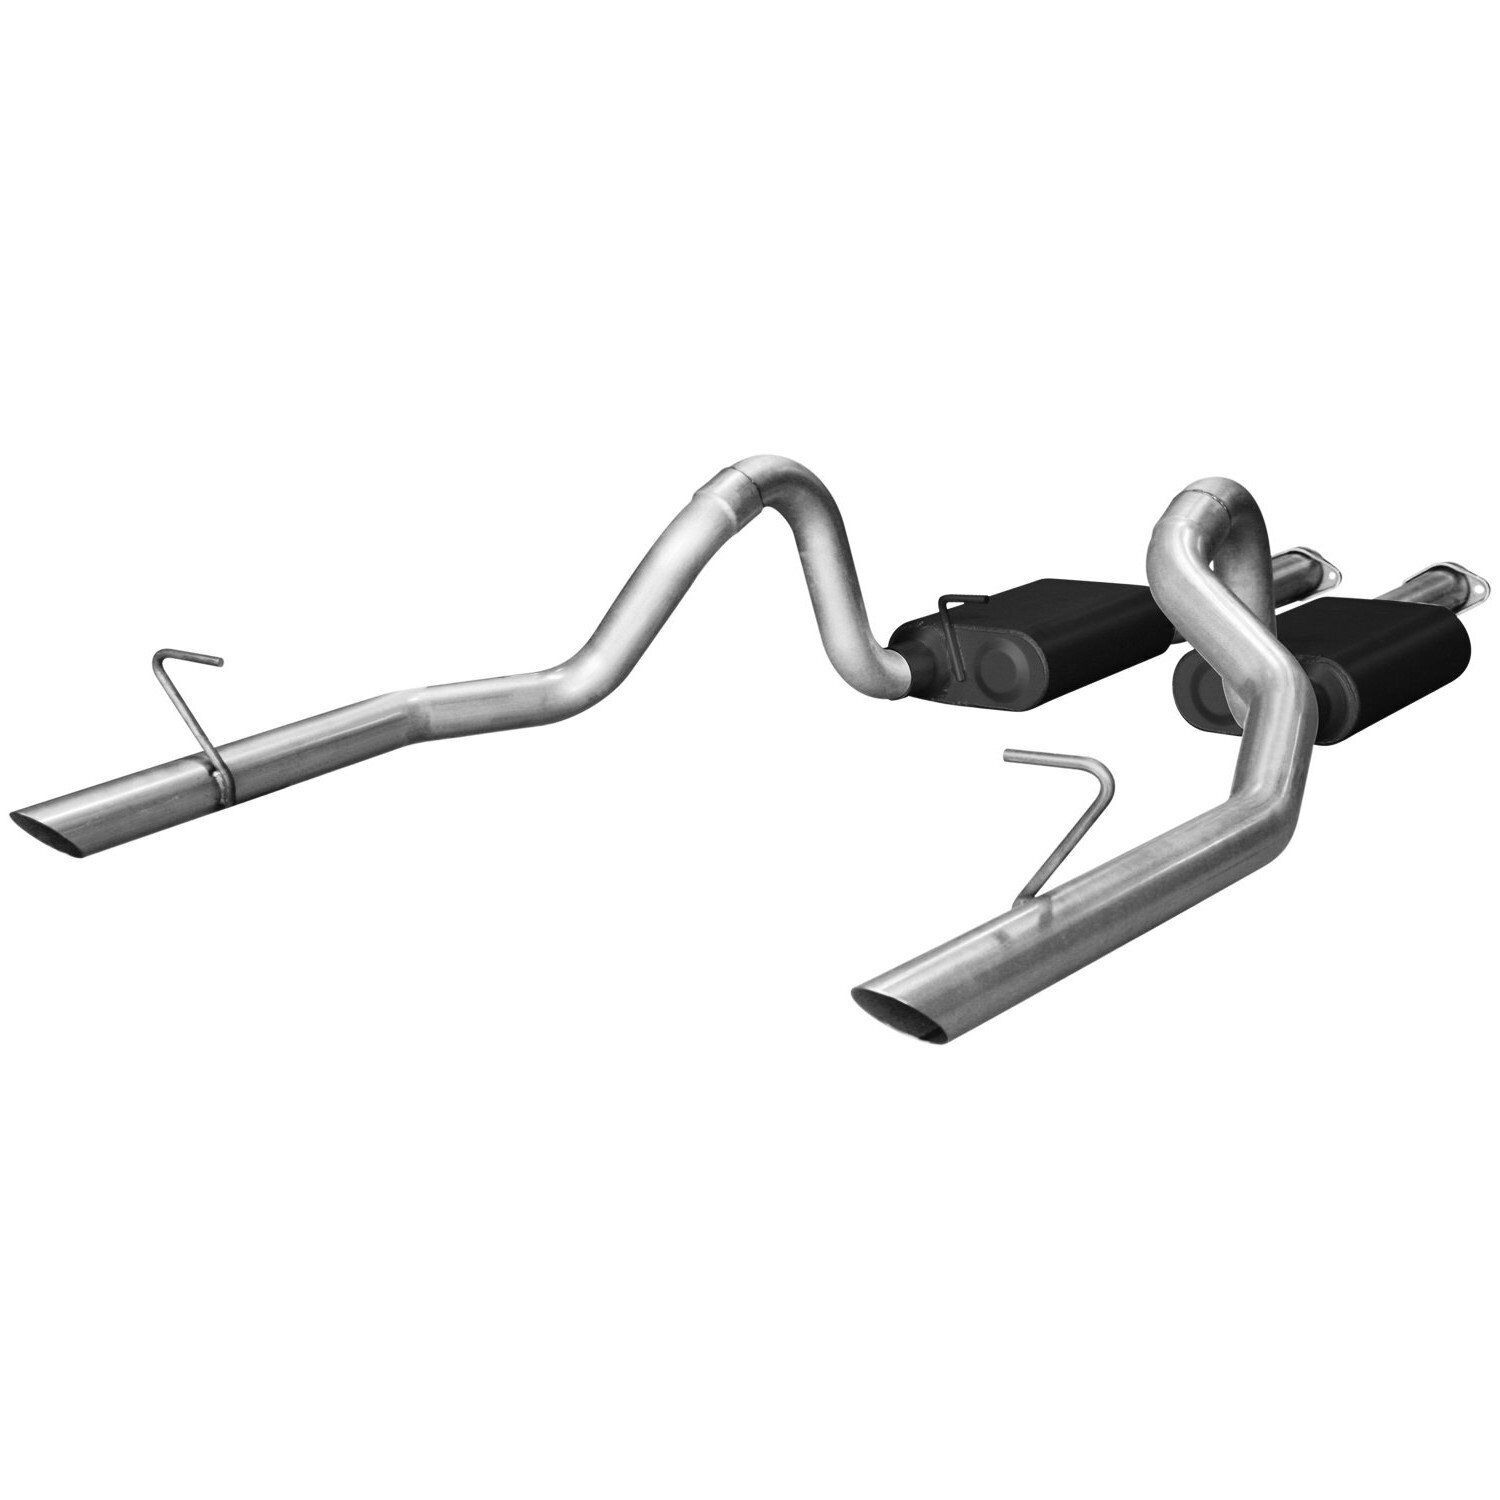 17113 Flowmaster American Thunder CatBack Exhaust System